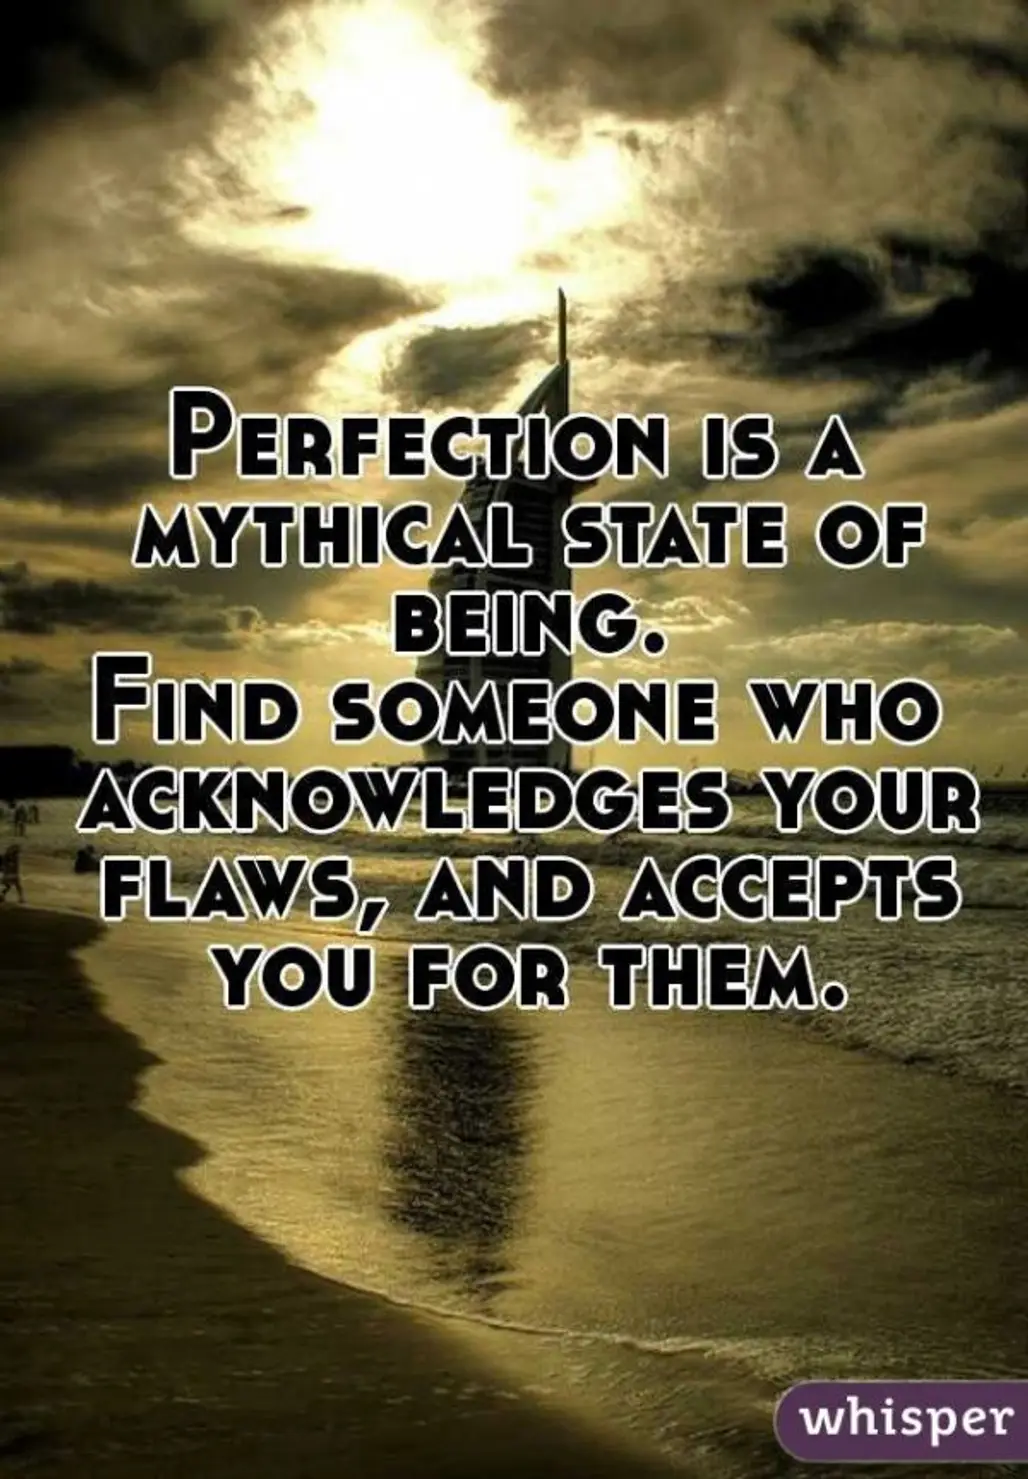 Accept All Your Flaws